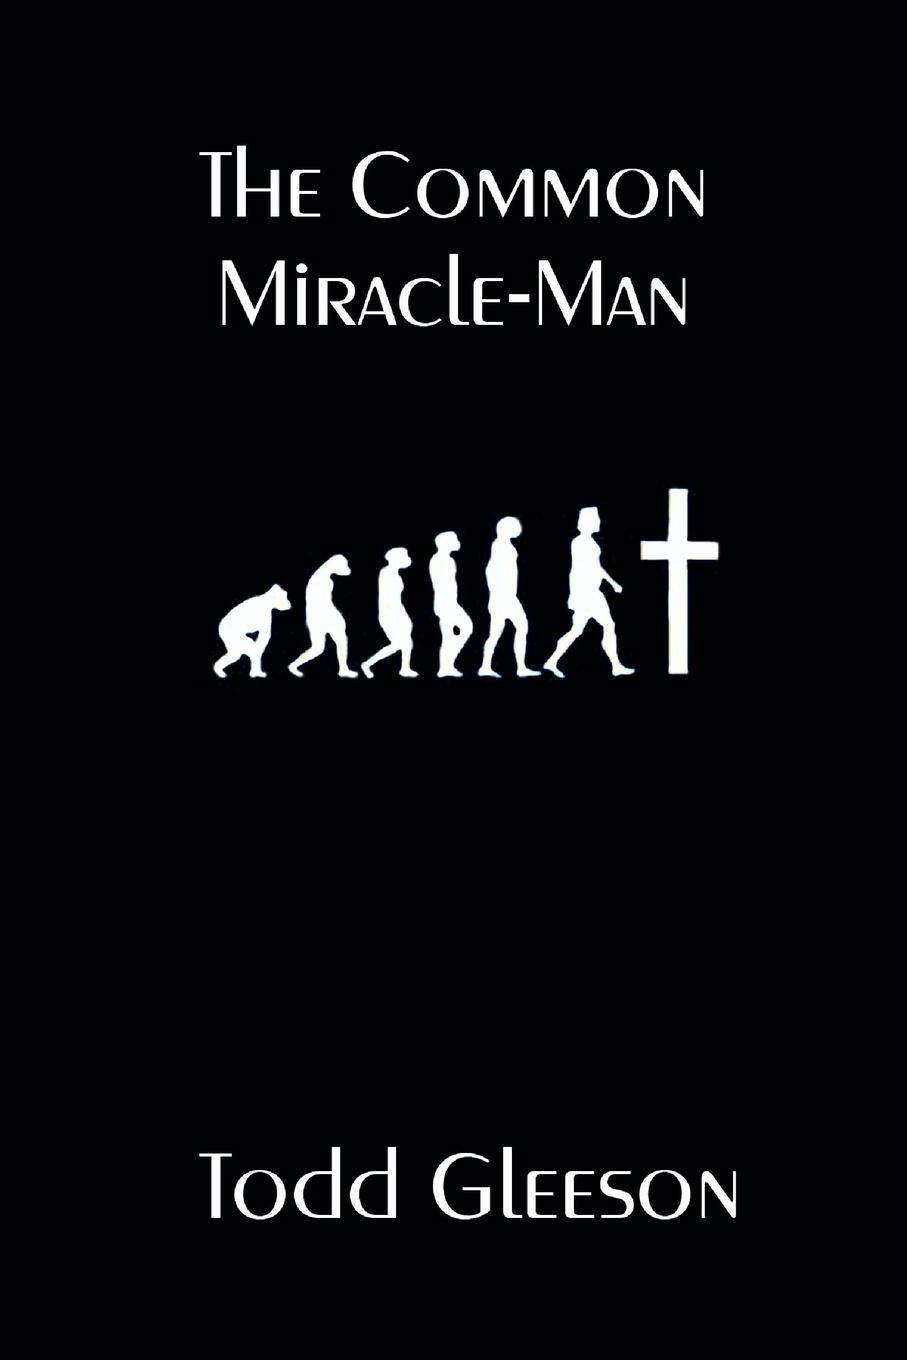 The Common Miracle-Man